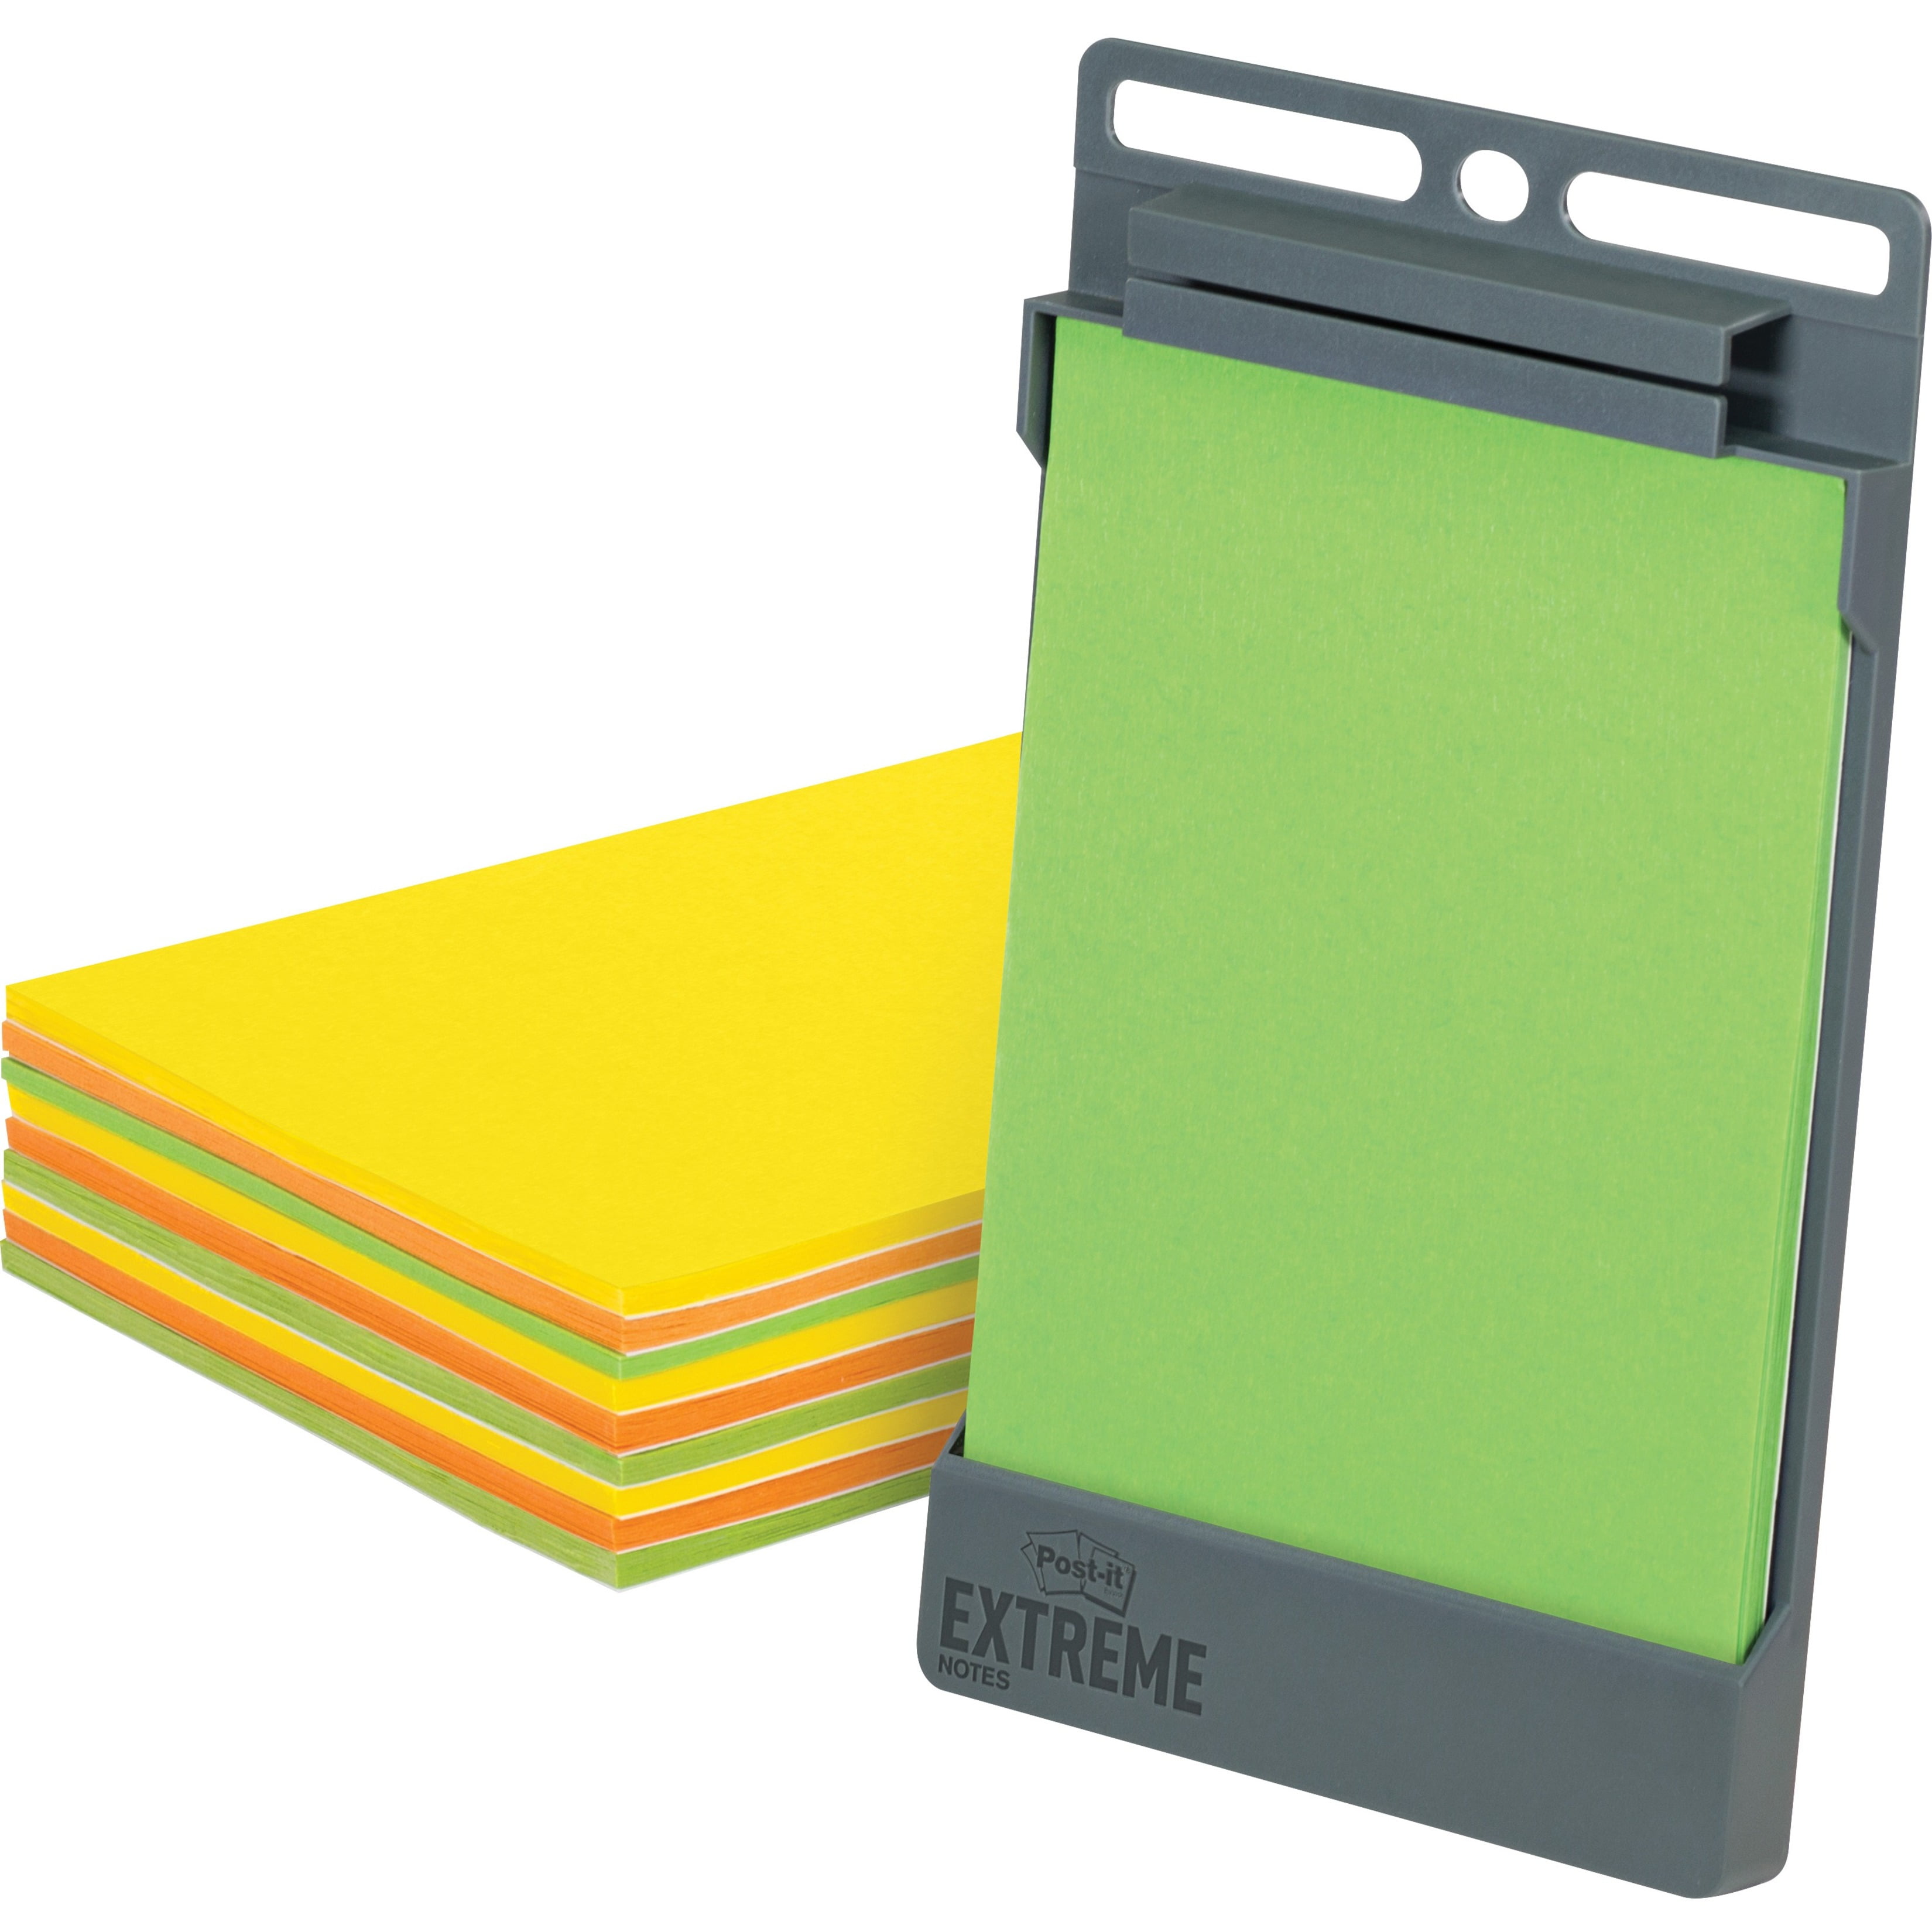 Post-it Extreme XL Notes, Works outdoors, Works in 0 - 120 degrees  Fahrenheit, 100X the holding power, Orange and Yellow, 25 Sheets per Pad, 2